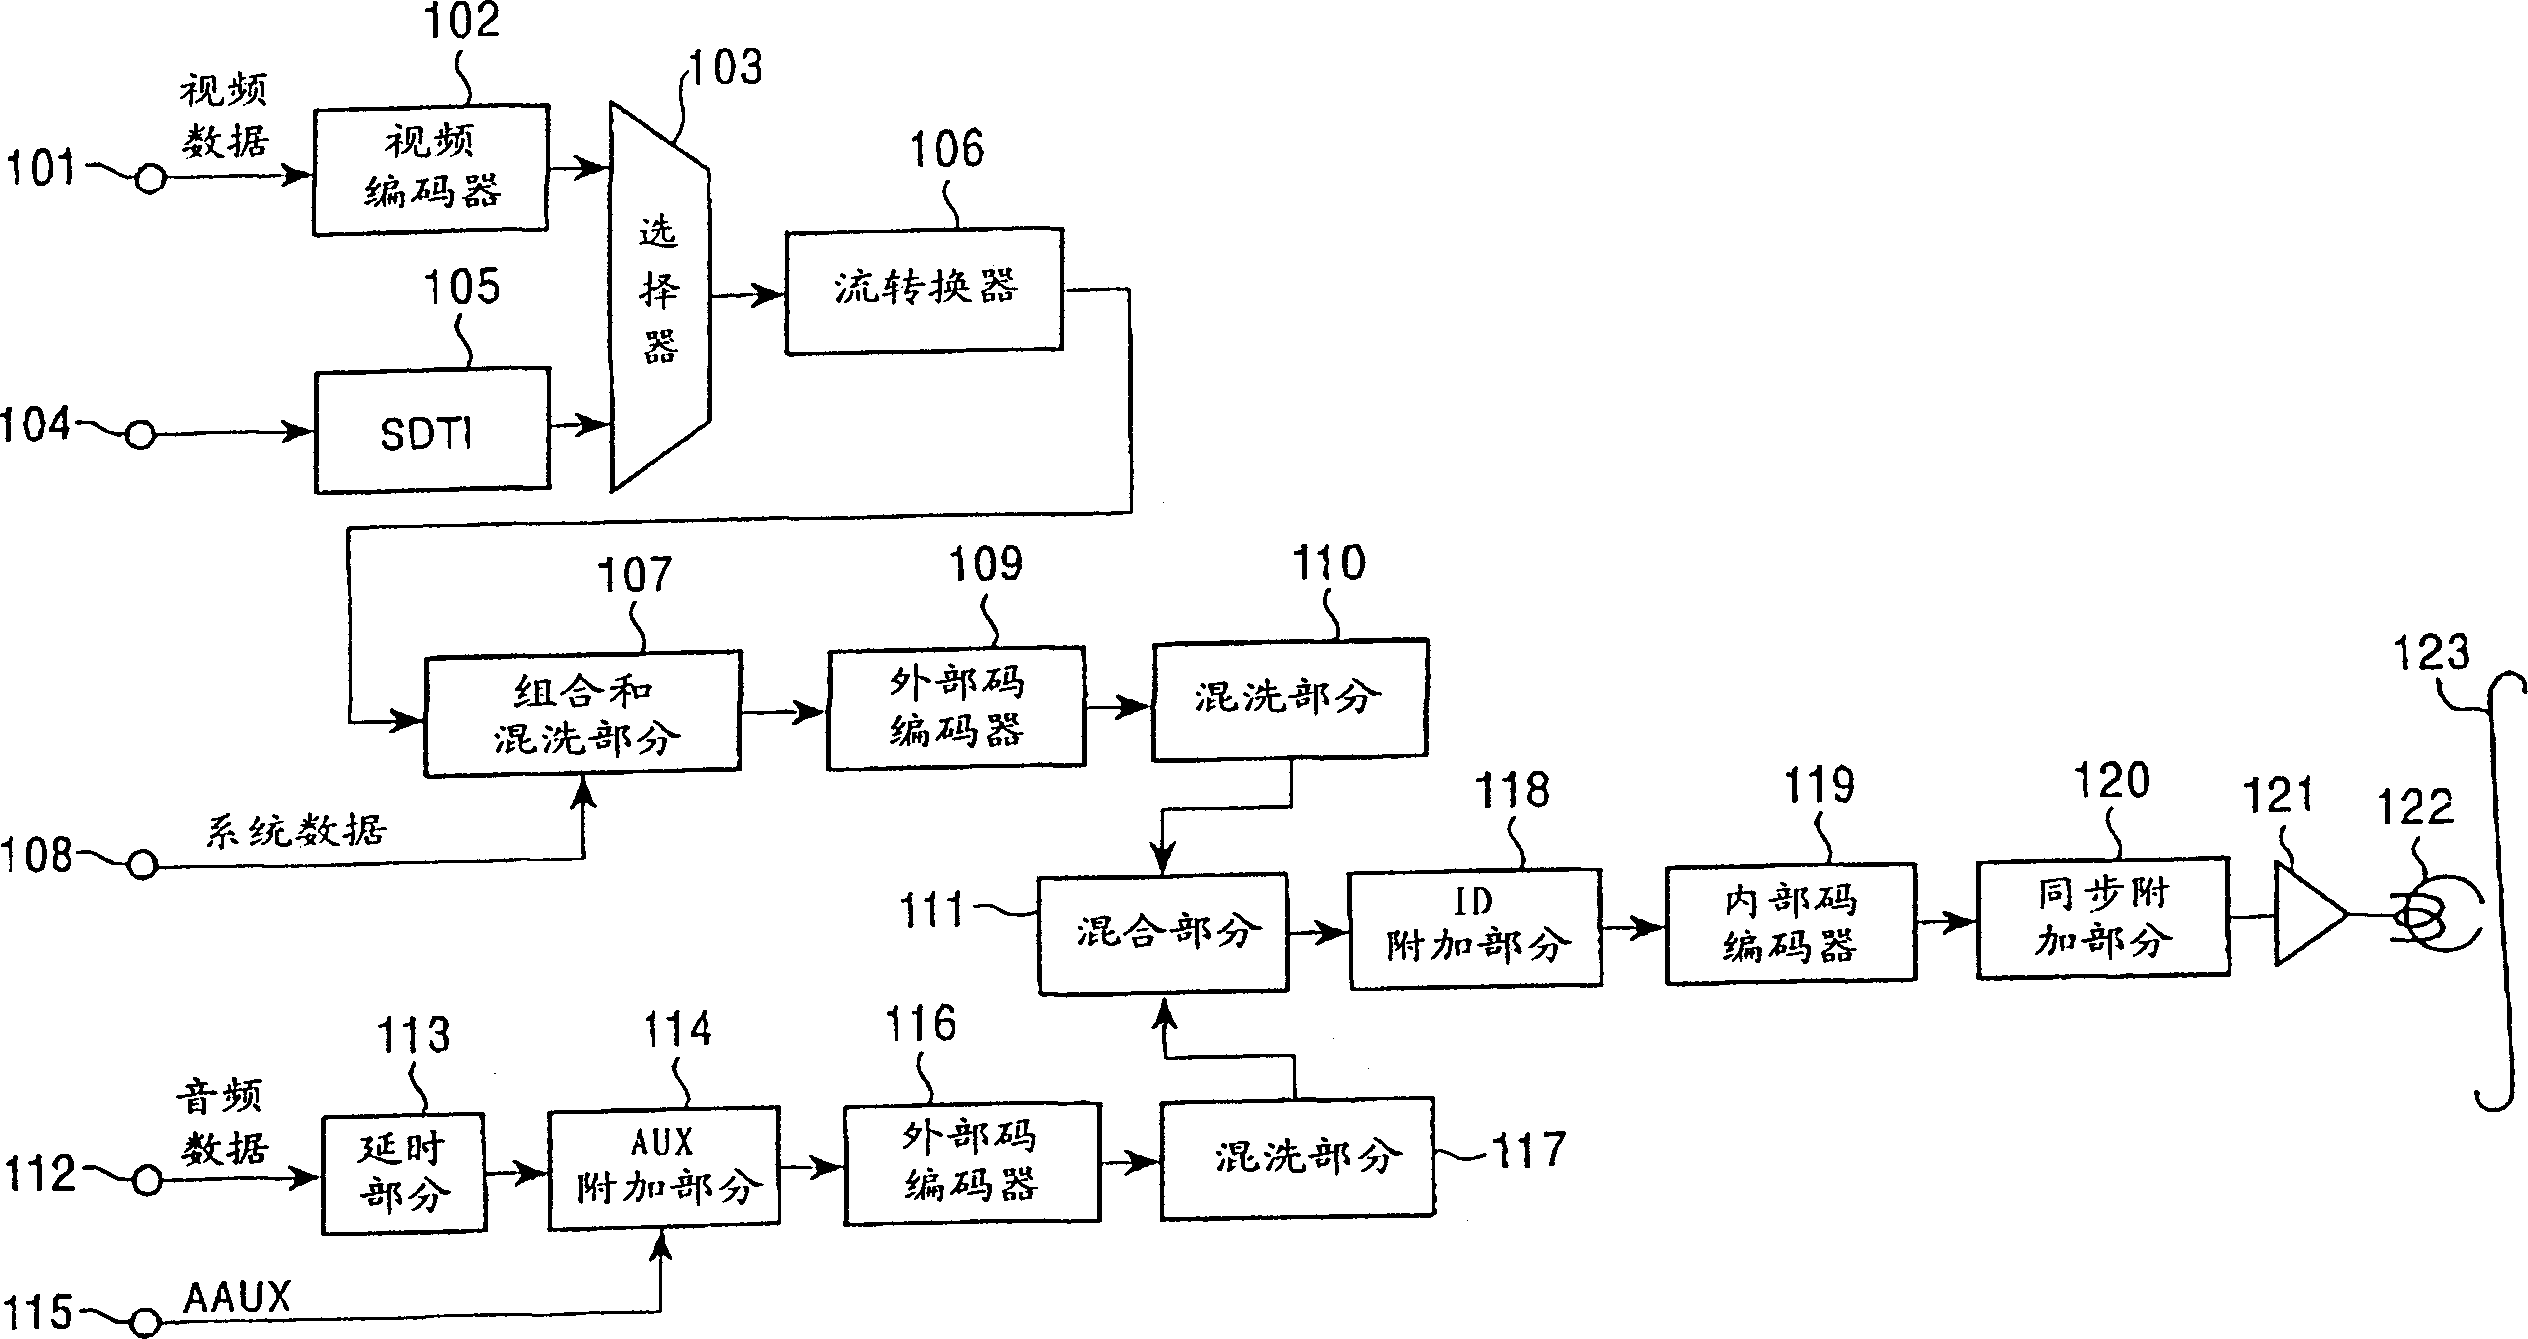 Data processing device and data recording device